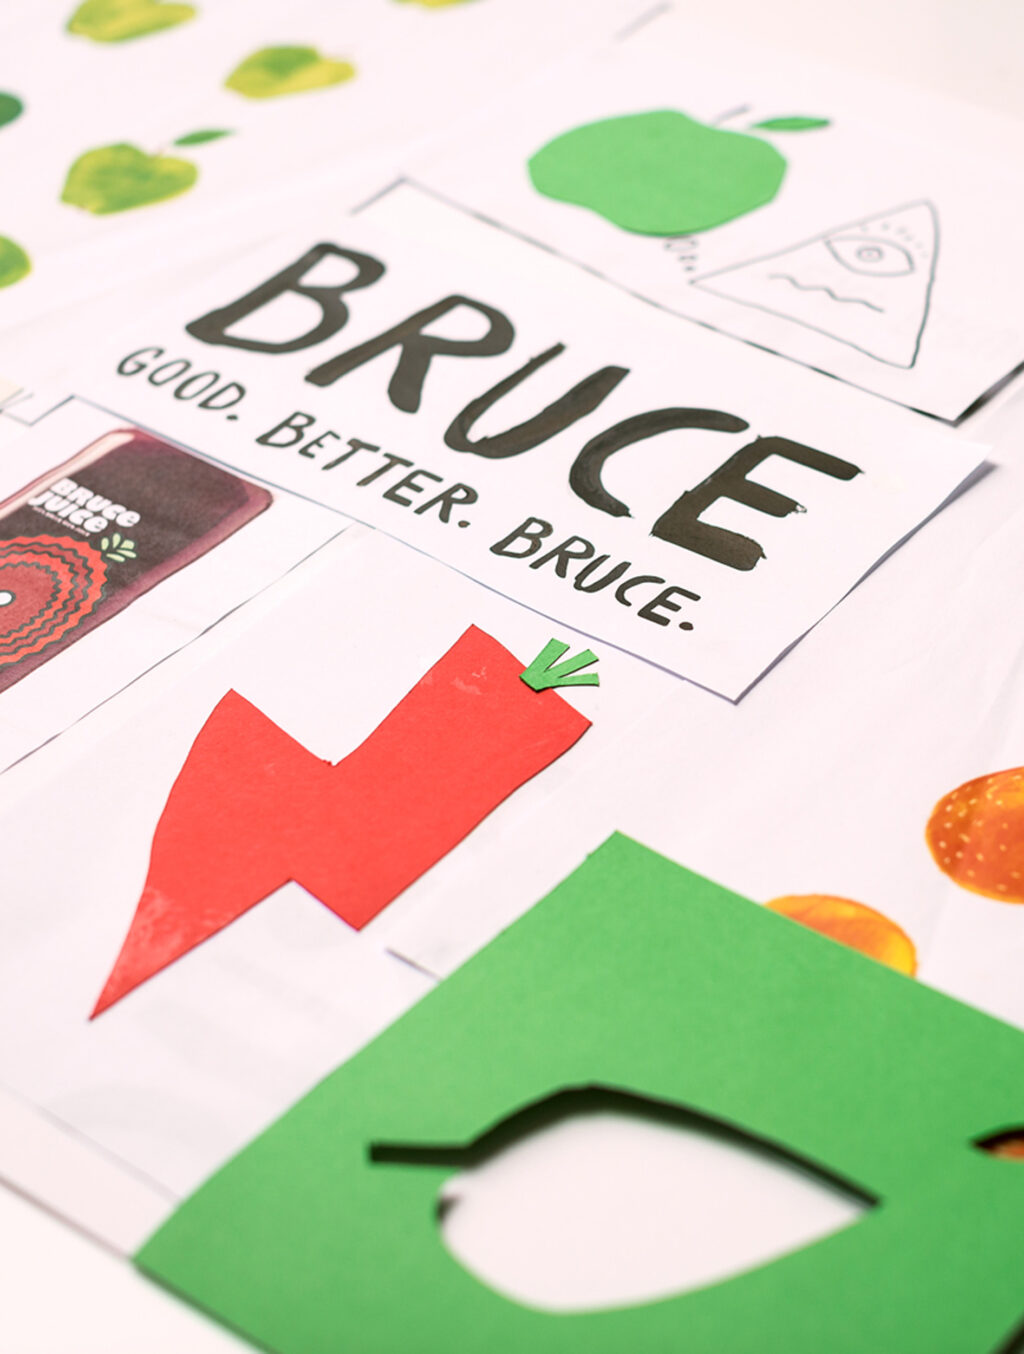 Bruce Collage – 2014